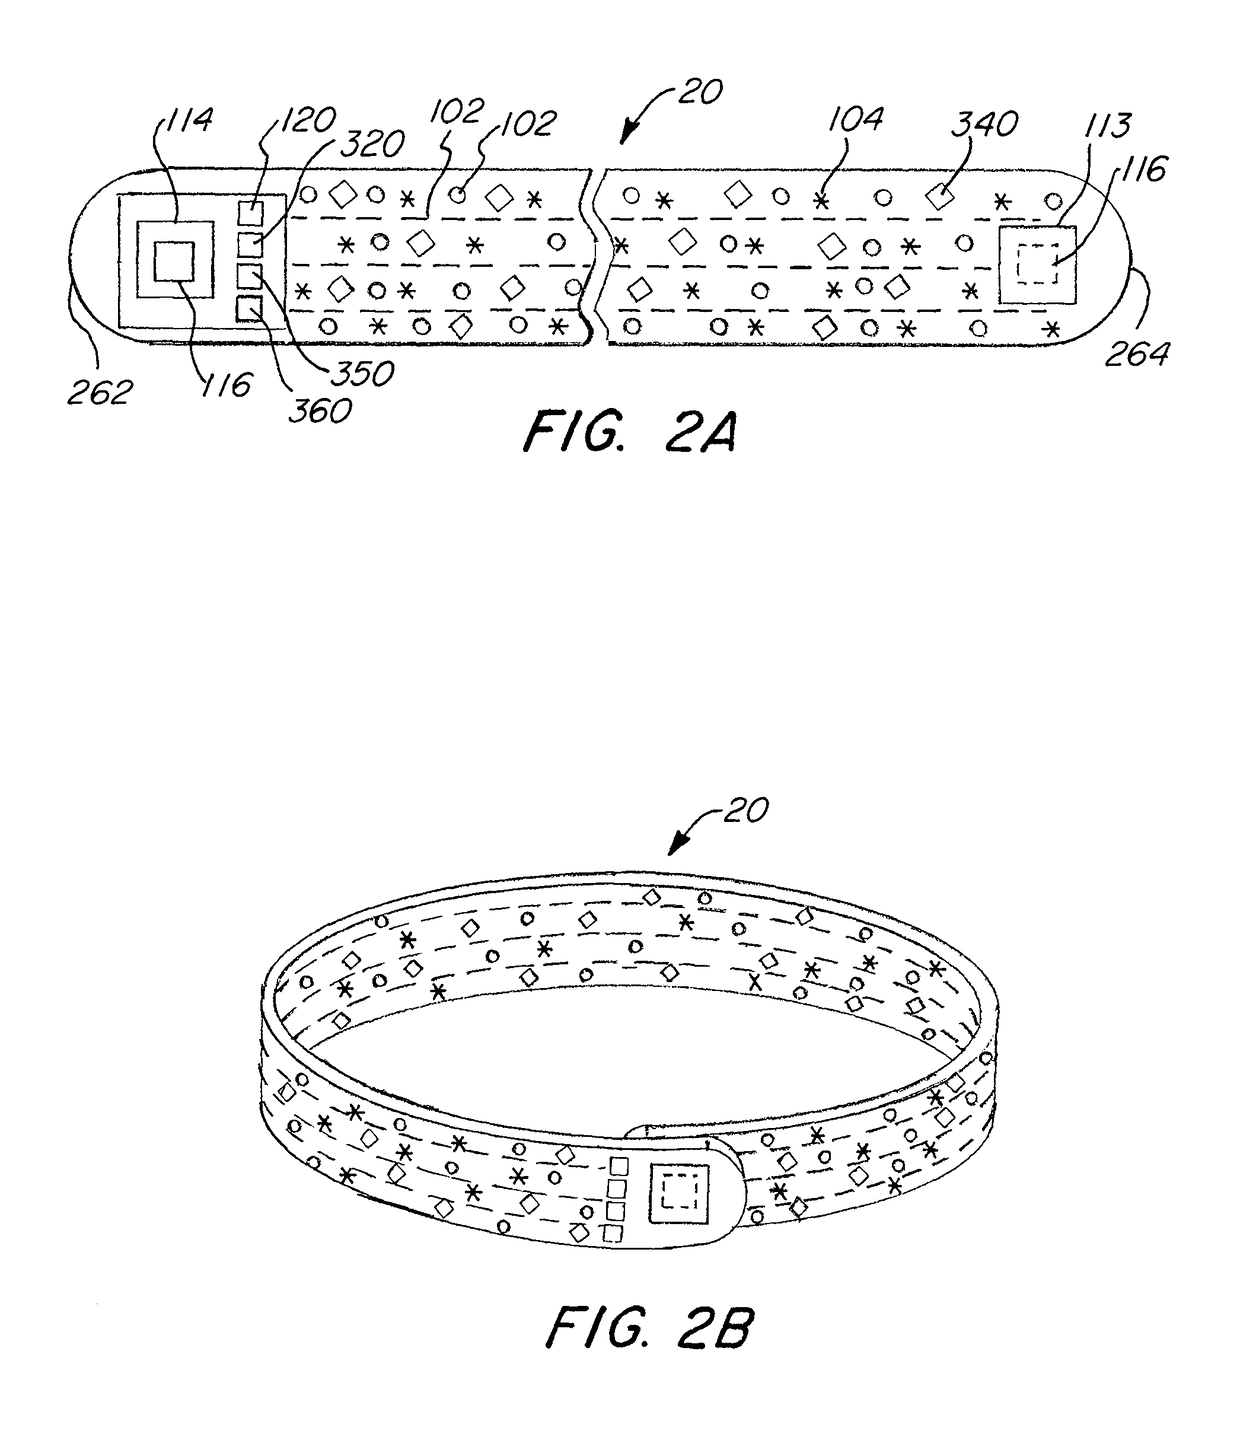 Self-Fitting, Self-Adjusting, Automatically Adjusting and/or Automatically Fitting Orthopedic or other (e.g. non human use) Immobilization Splint or Device